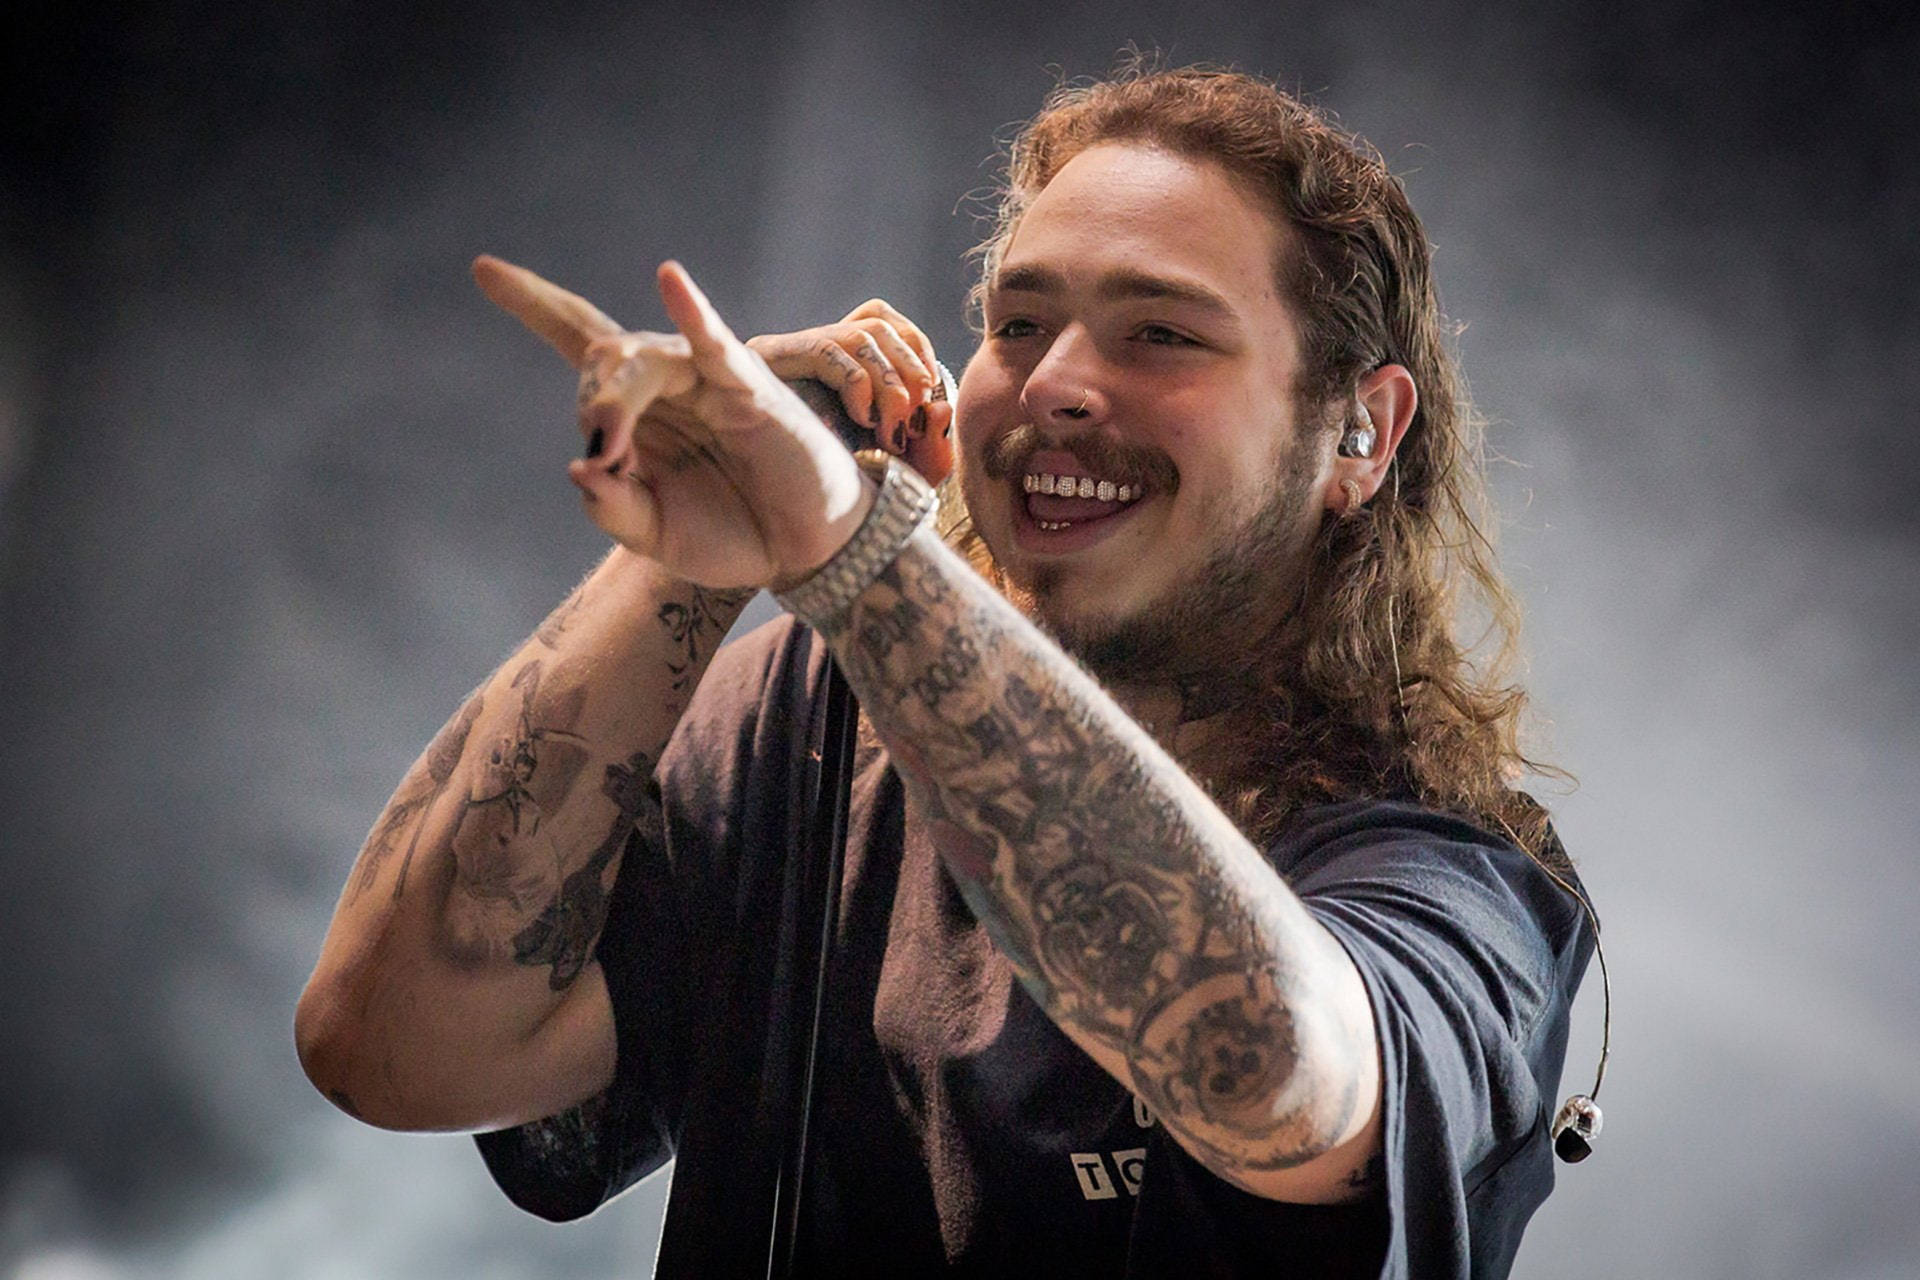 Post Malone Wallpaper Images